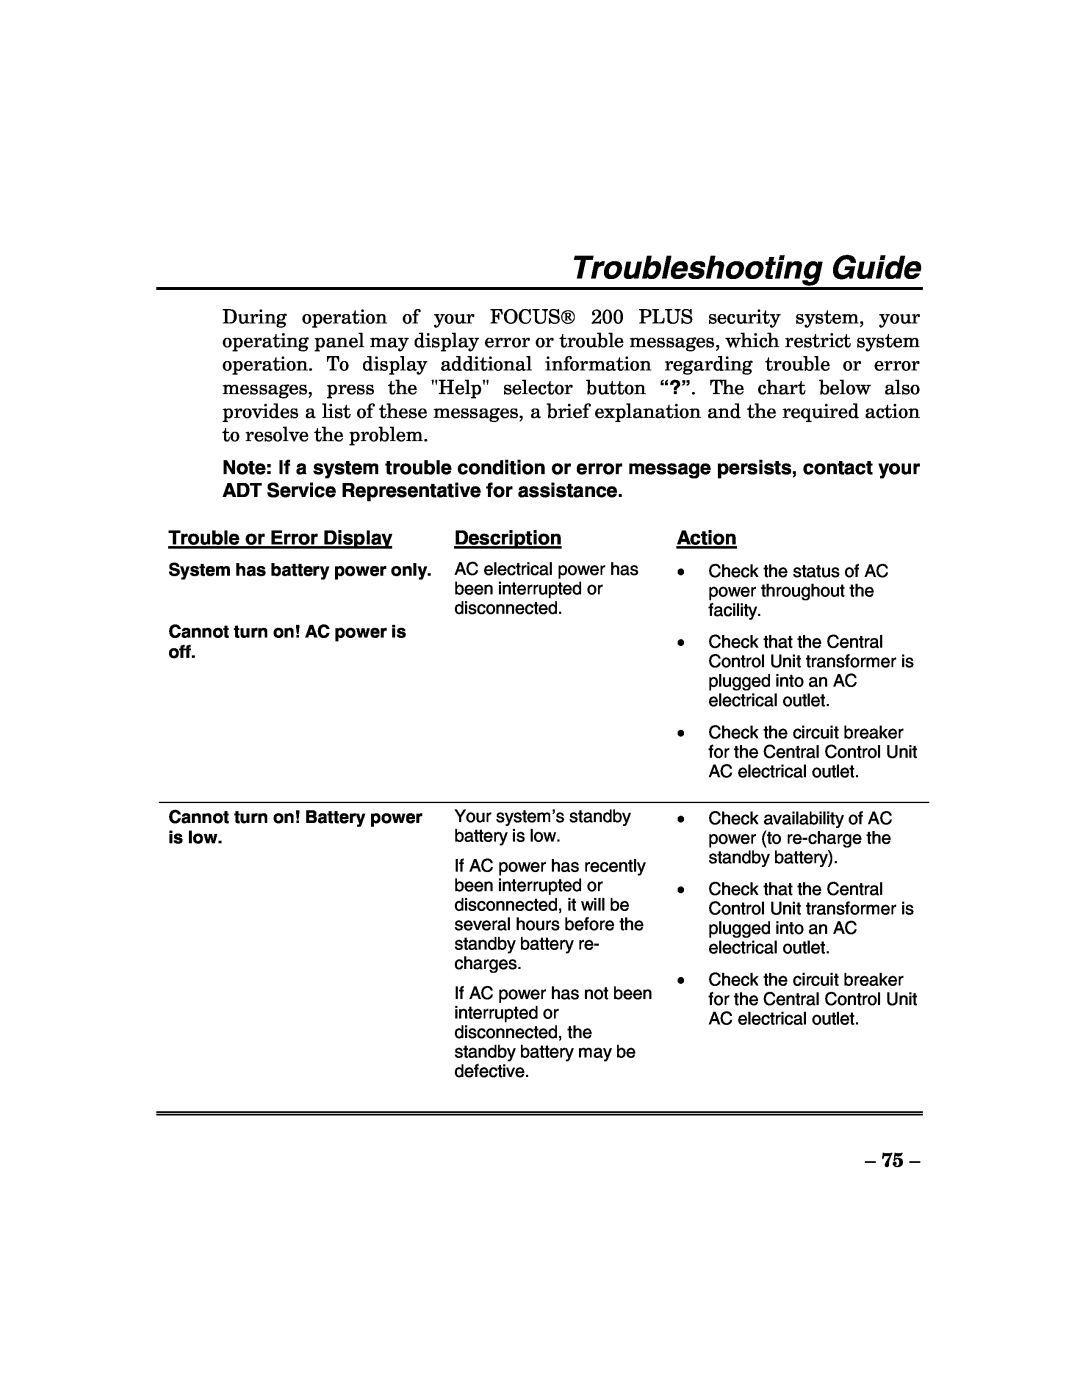 ADT Security Services 200 Plus manual Troubleshooting Guide, Trouble or Error Display, Description, Action 